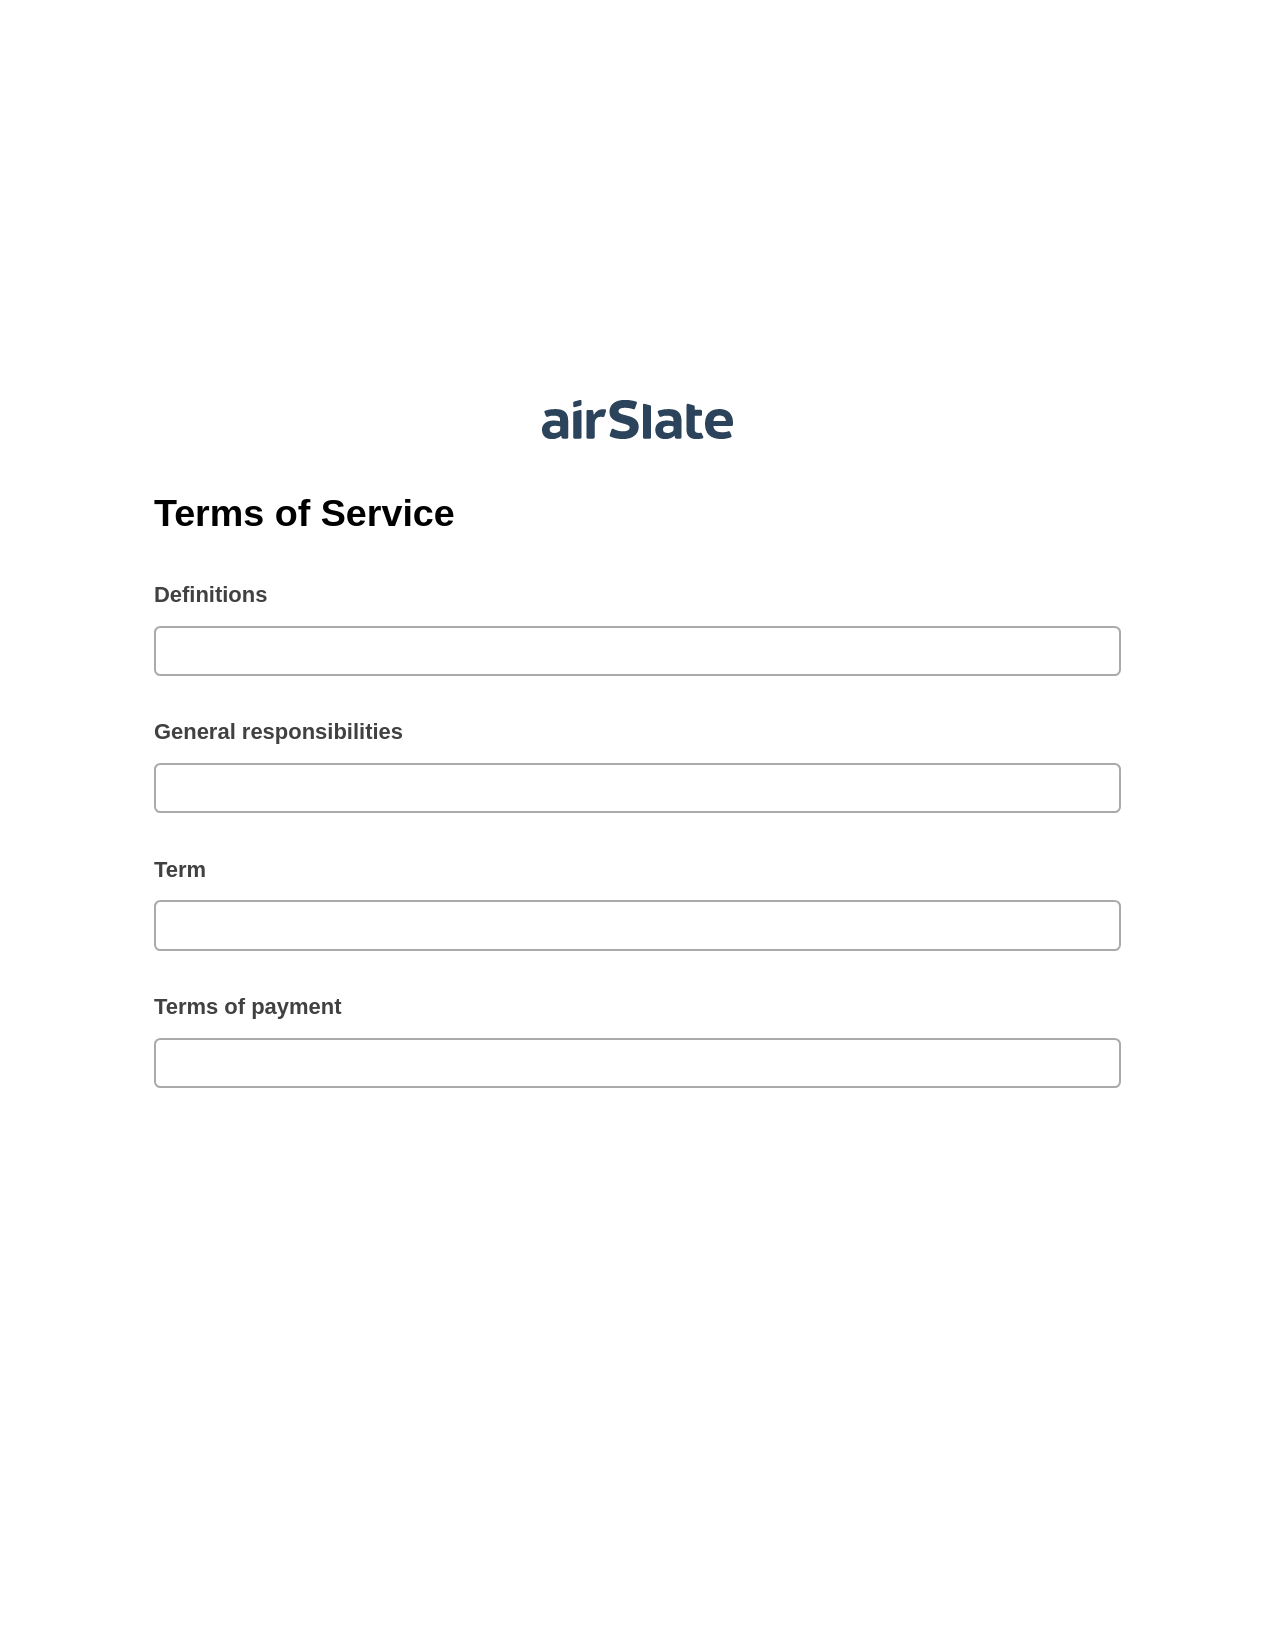 Terms of Service Pre-fill from CSV File Bot, Assign Slate Name Bot, Export to MySQL Bot